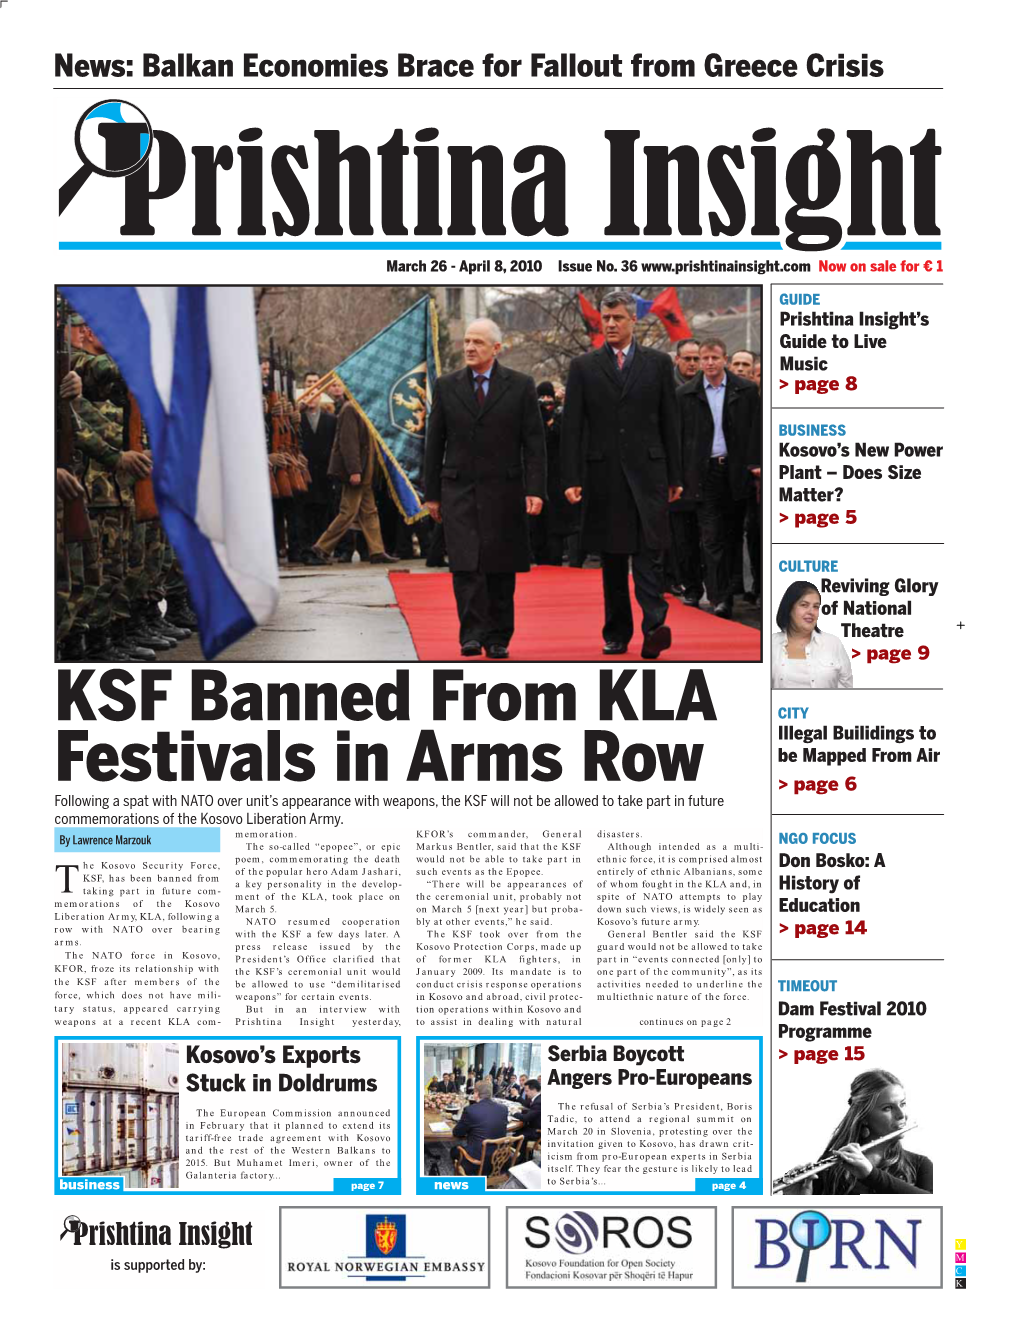 KSF Banned from KLA Festivals in Arms Row